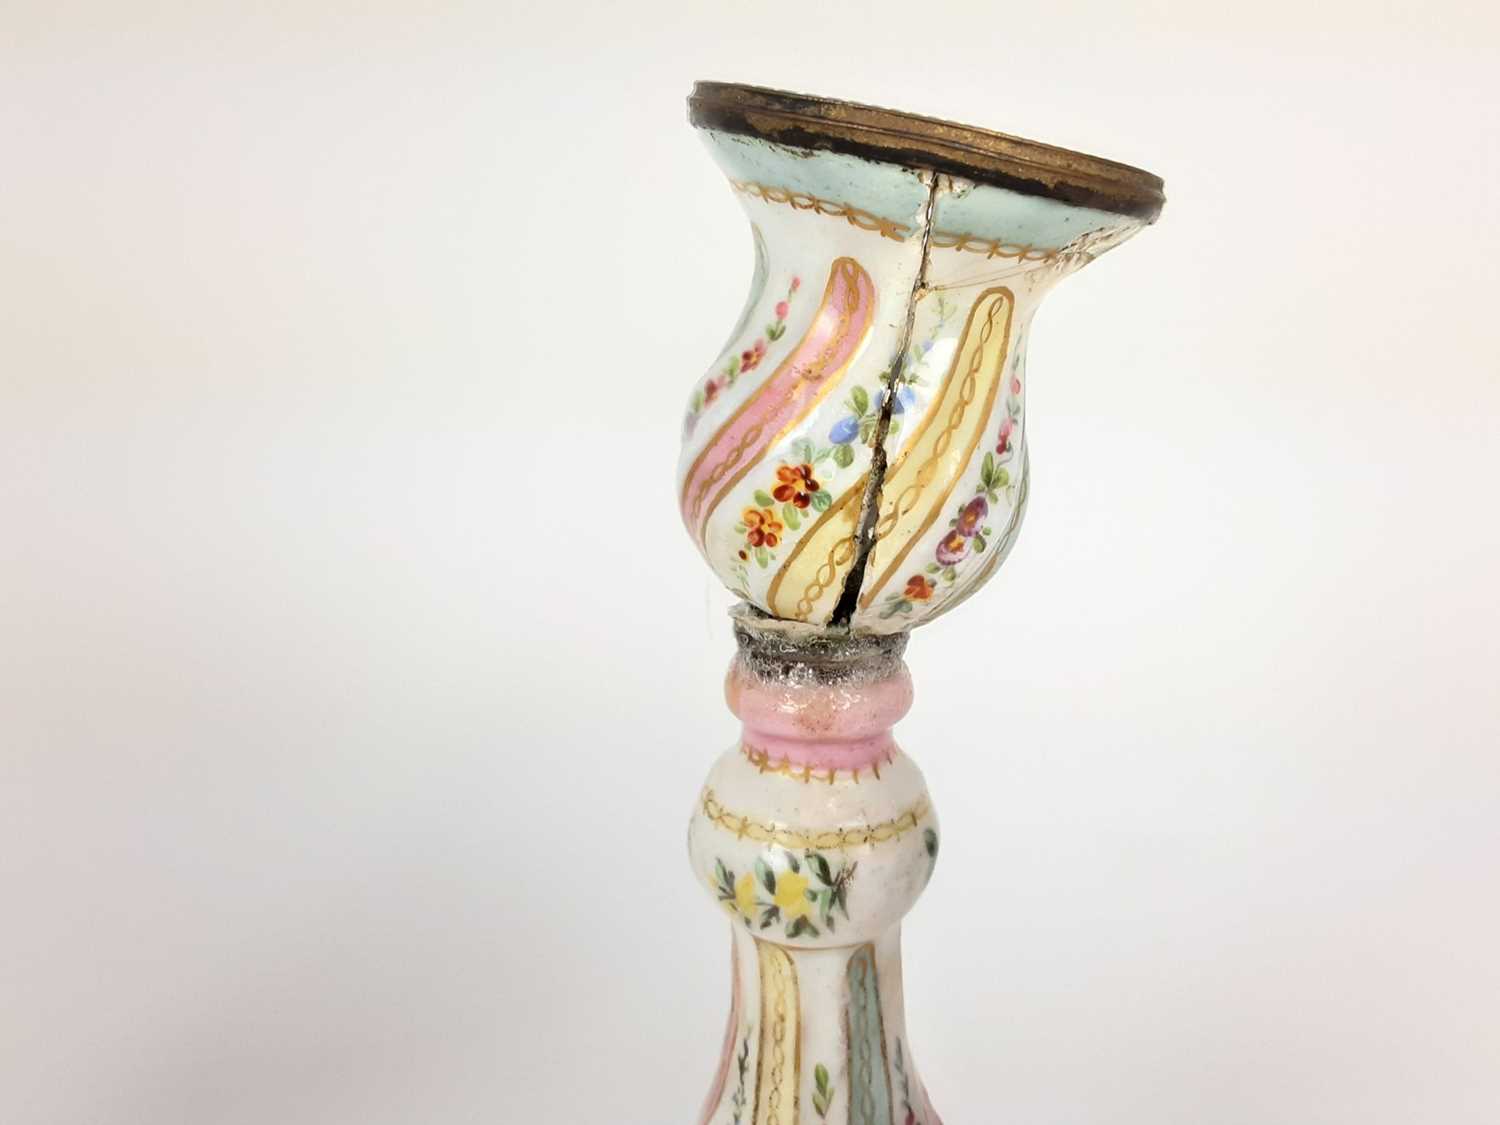 Pair of 18th century enamelled candlesticks, possibly Bilston, with spiralling knopped stems, painte - Image 4 of 7